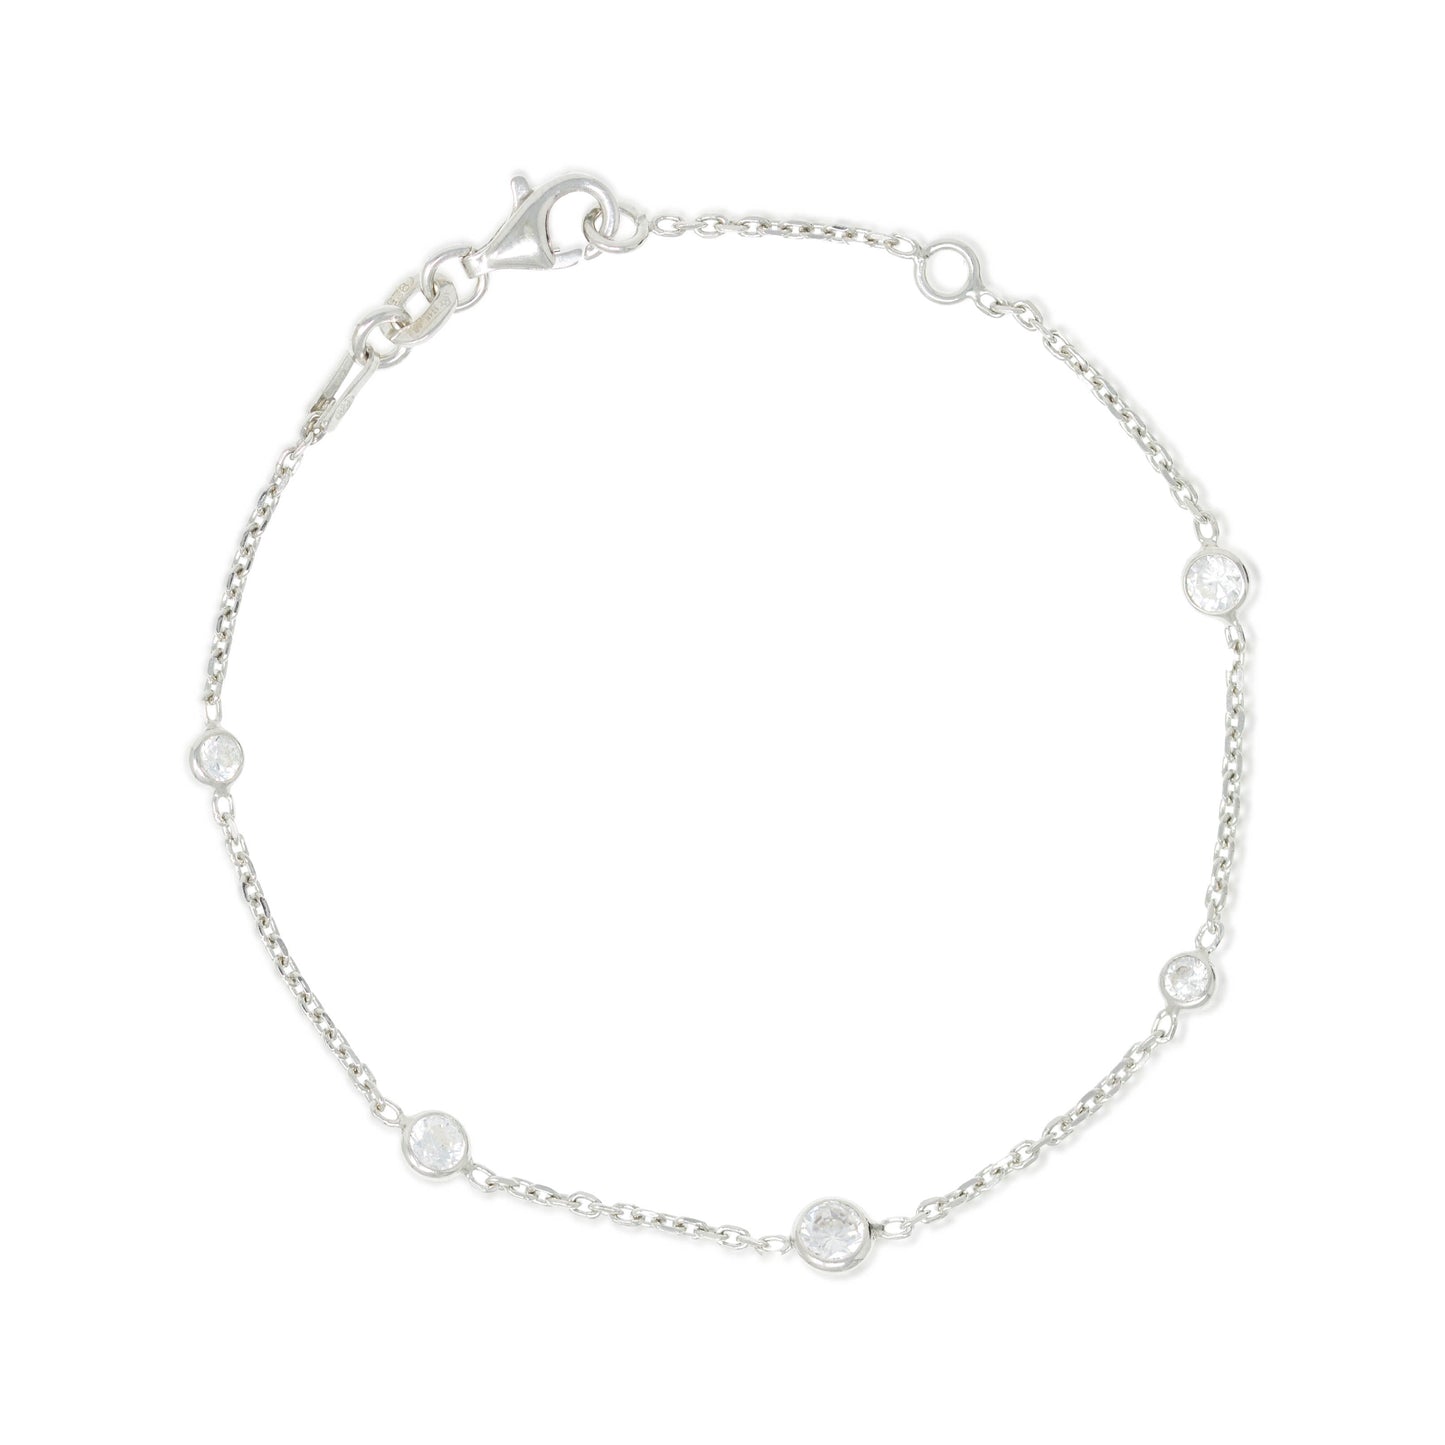 BX-31/CH/S - Sterling silver chain and cubic zirconia bracelet